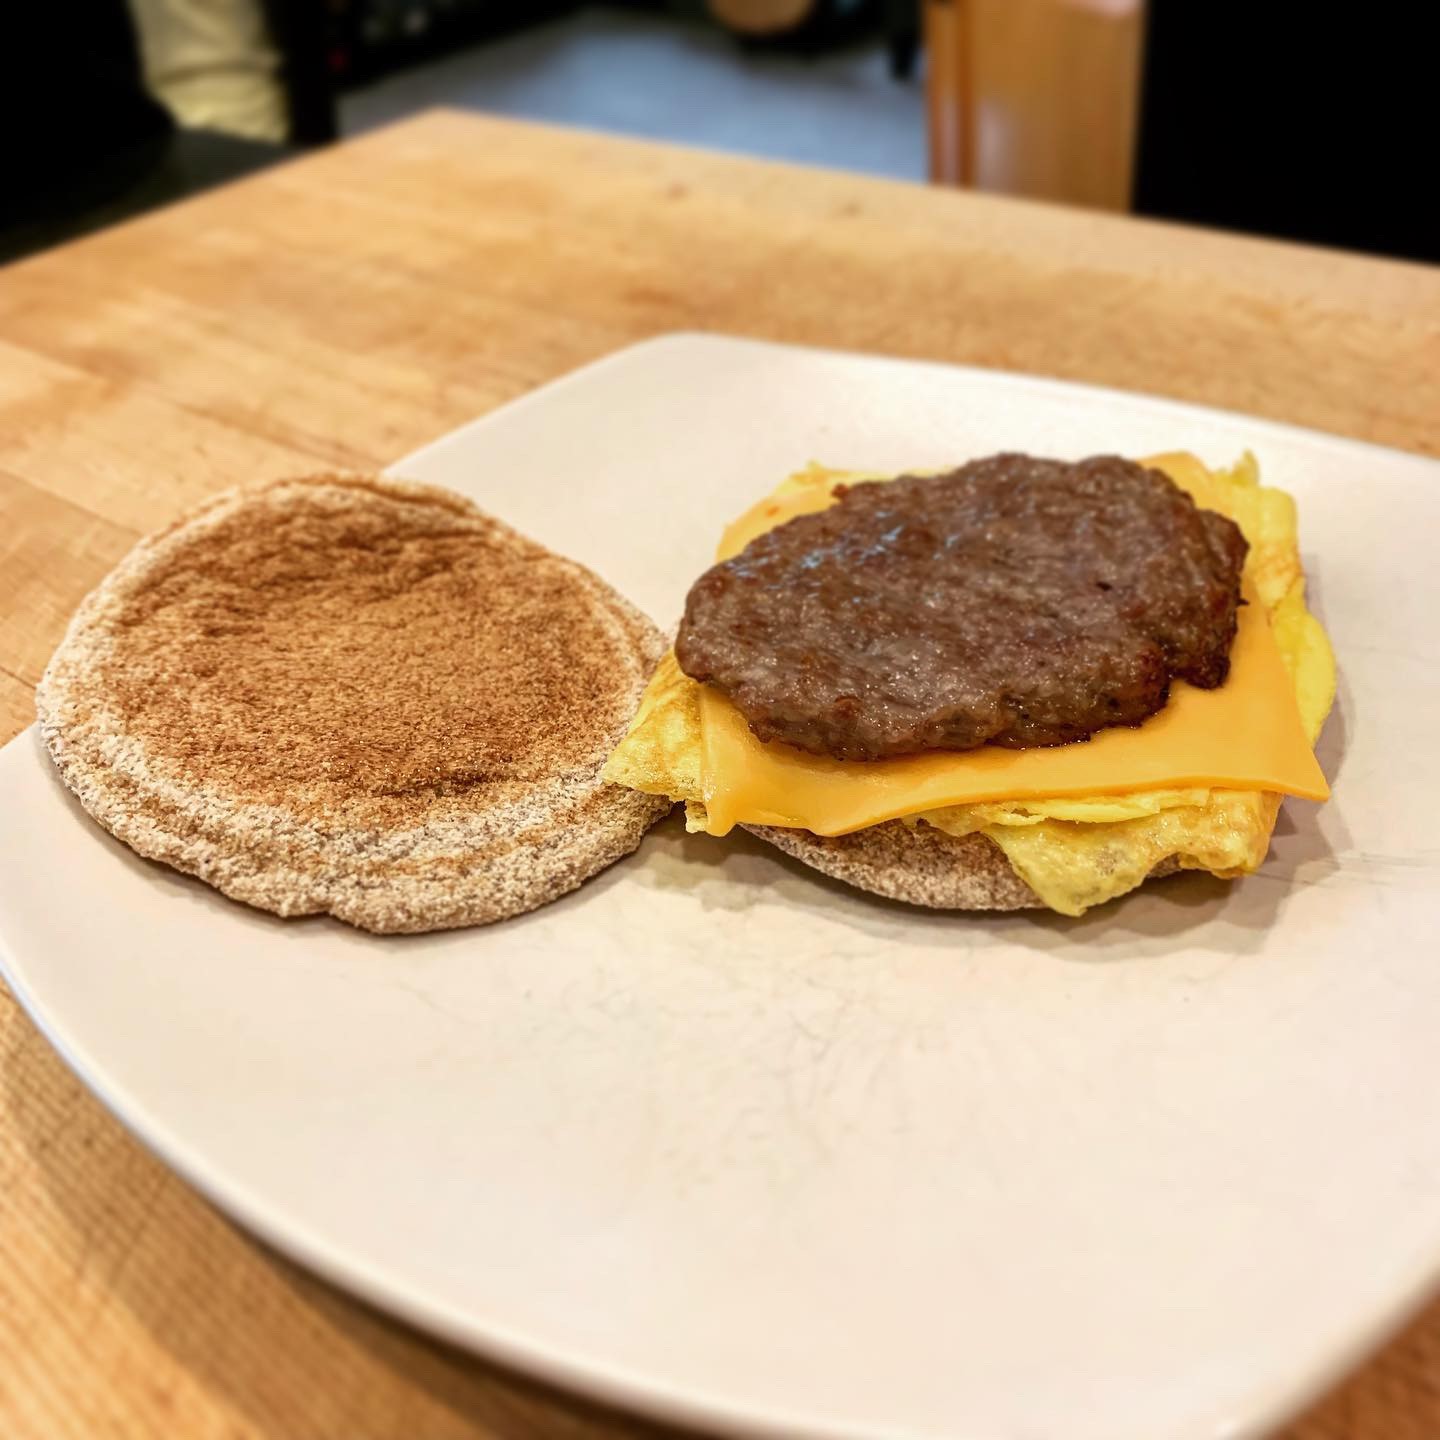 https://www.seriousketo.com/wp-content/uploads/2019/09/McGriddle-Open.jpg